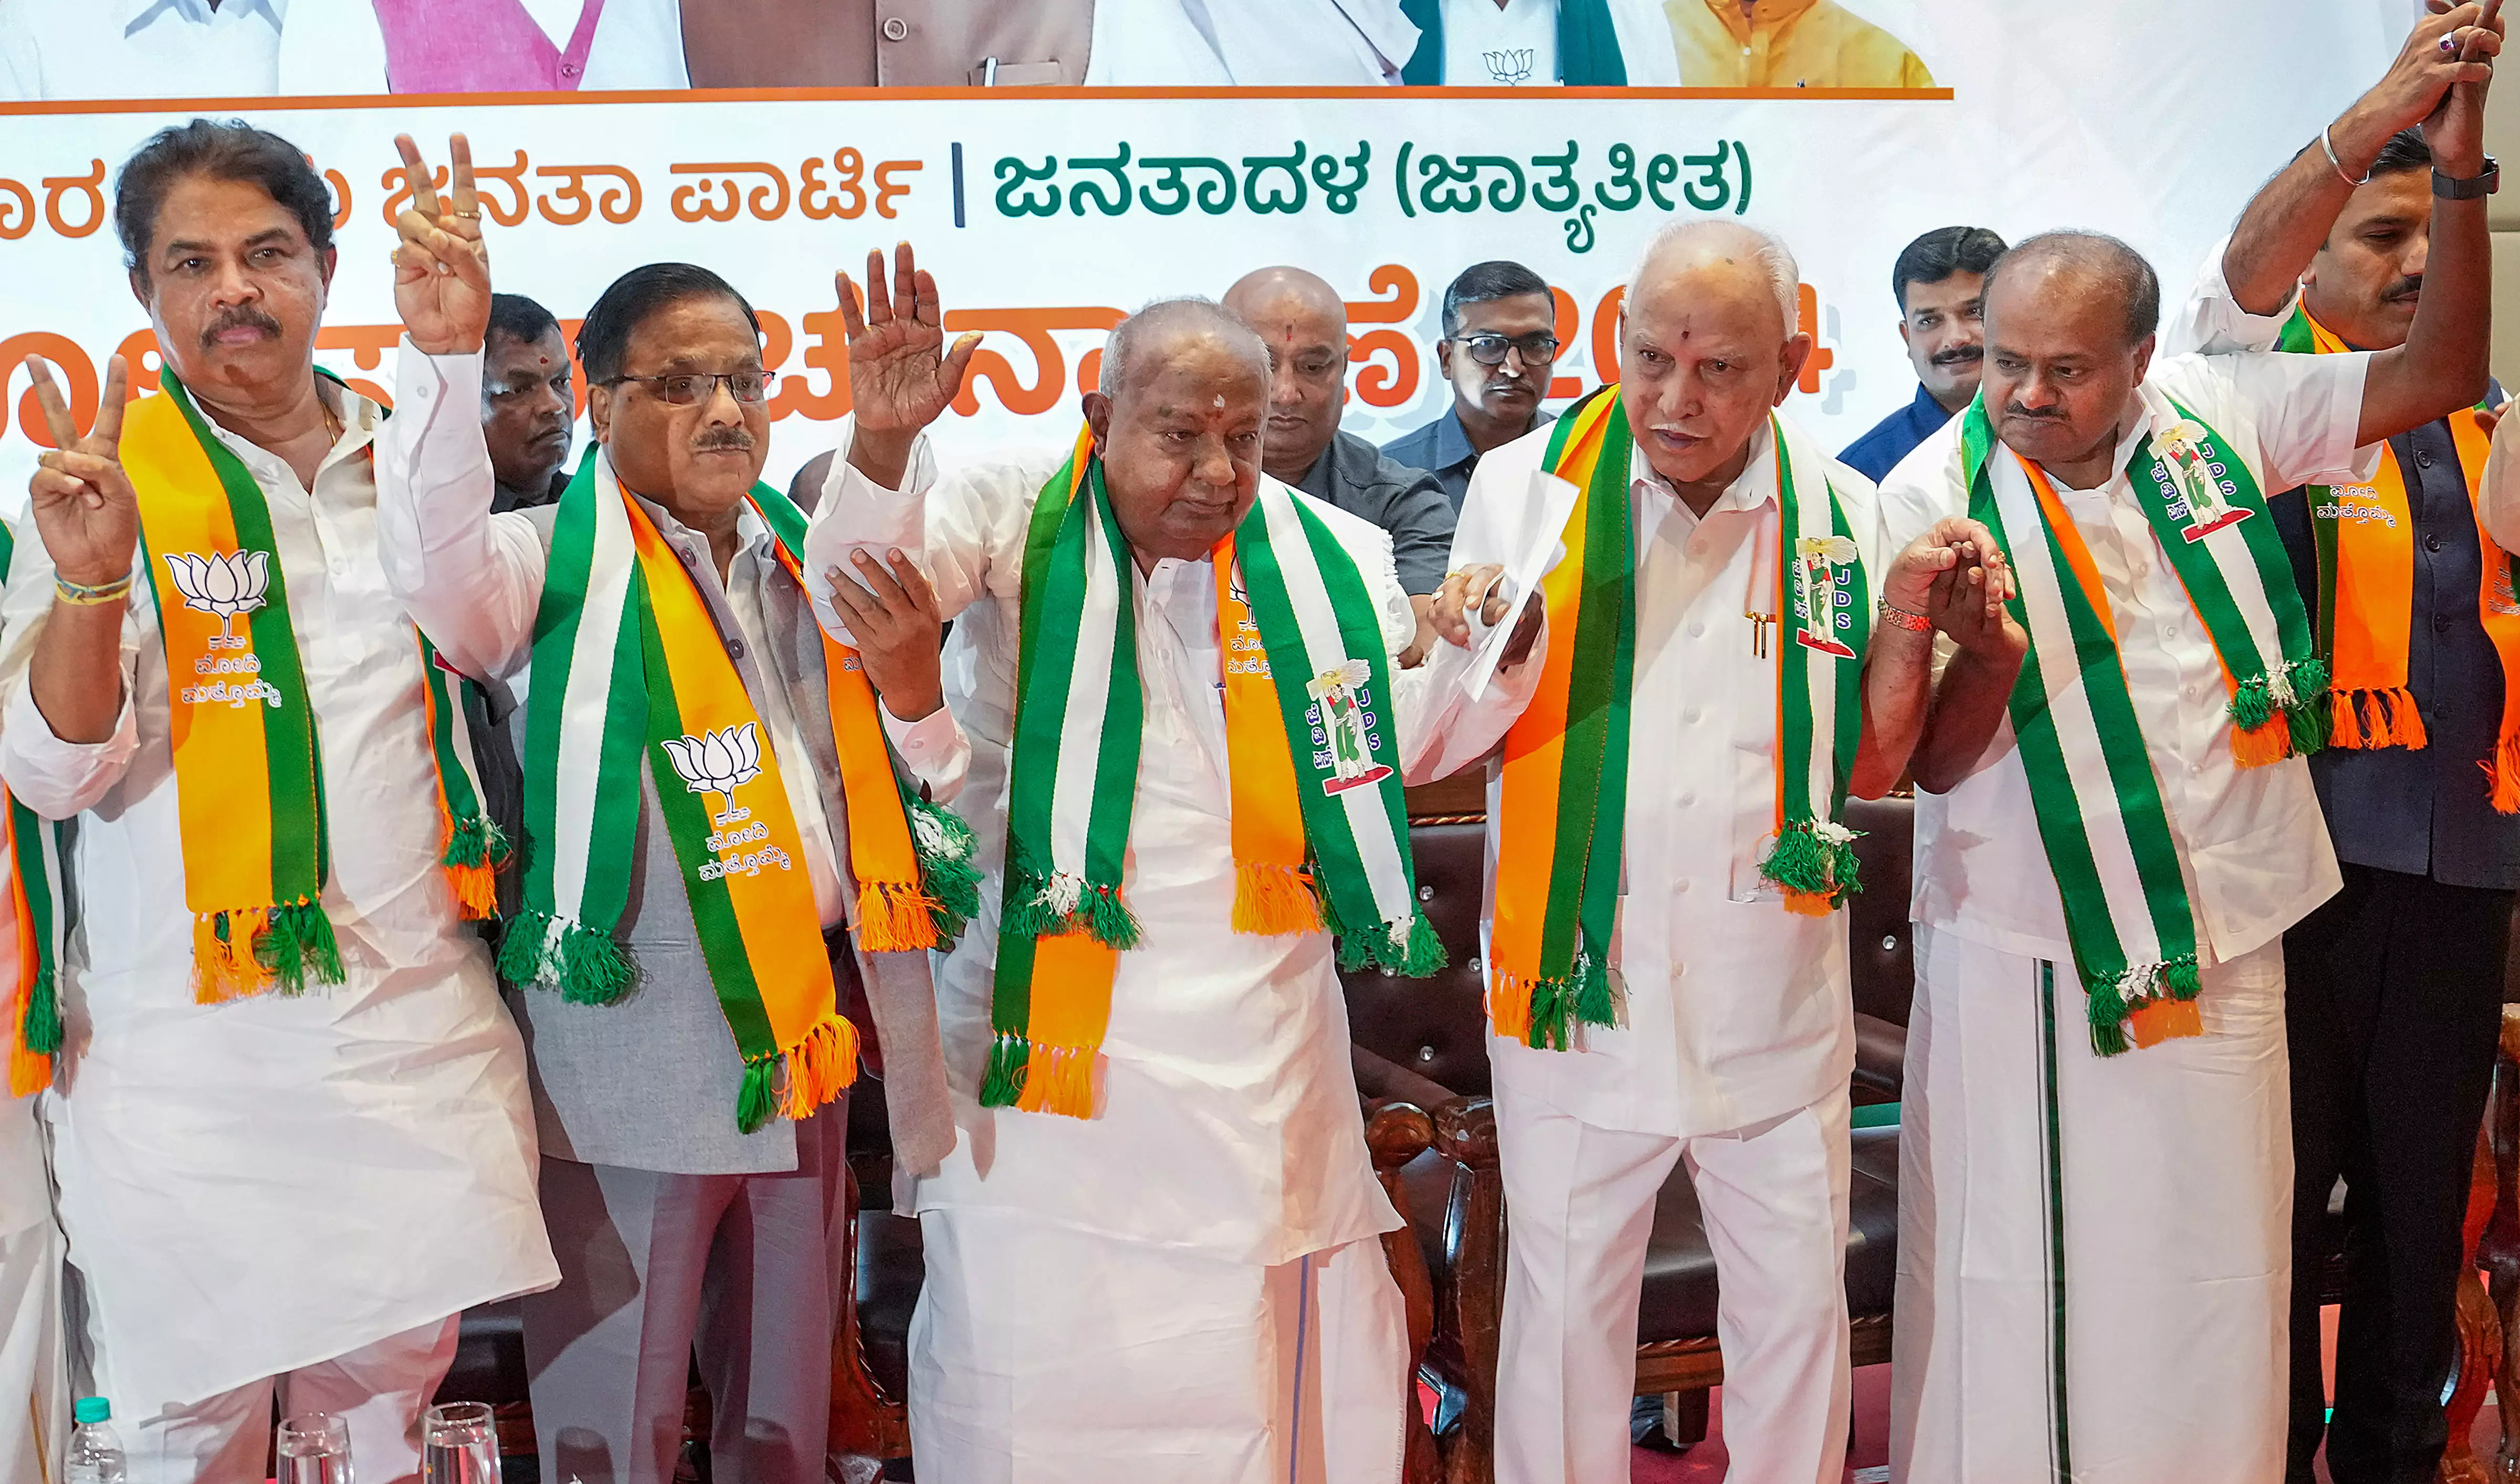 No leader other than Modi, Shah capable of solving country’s problems: Deve Gowda